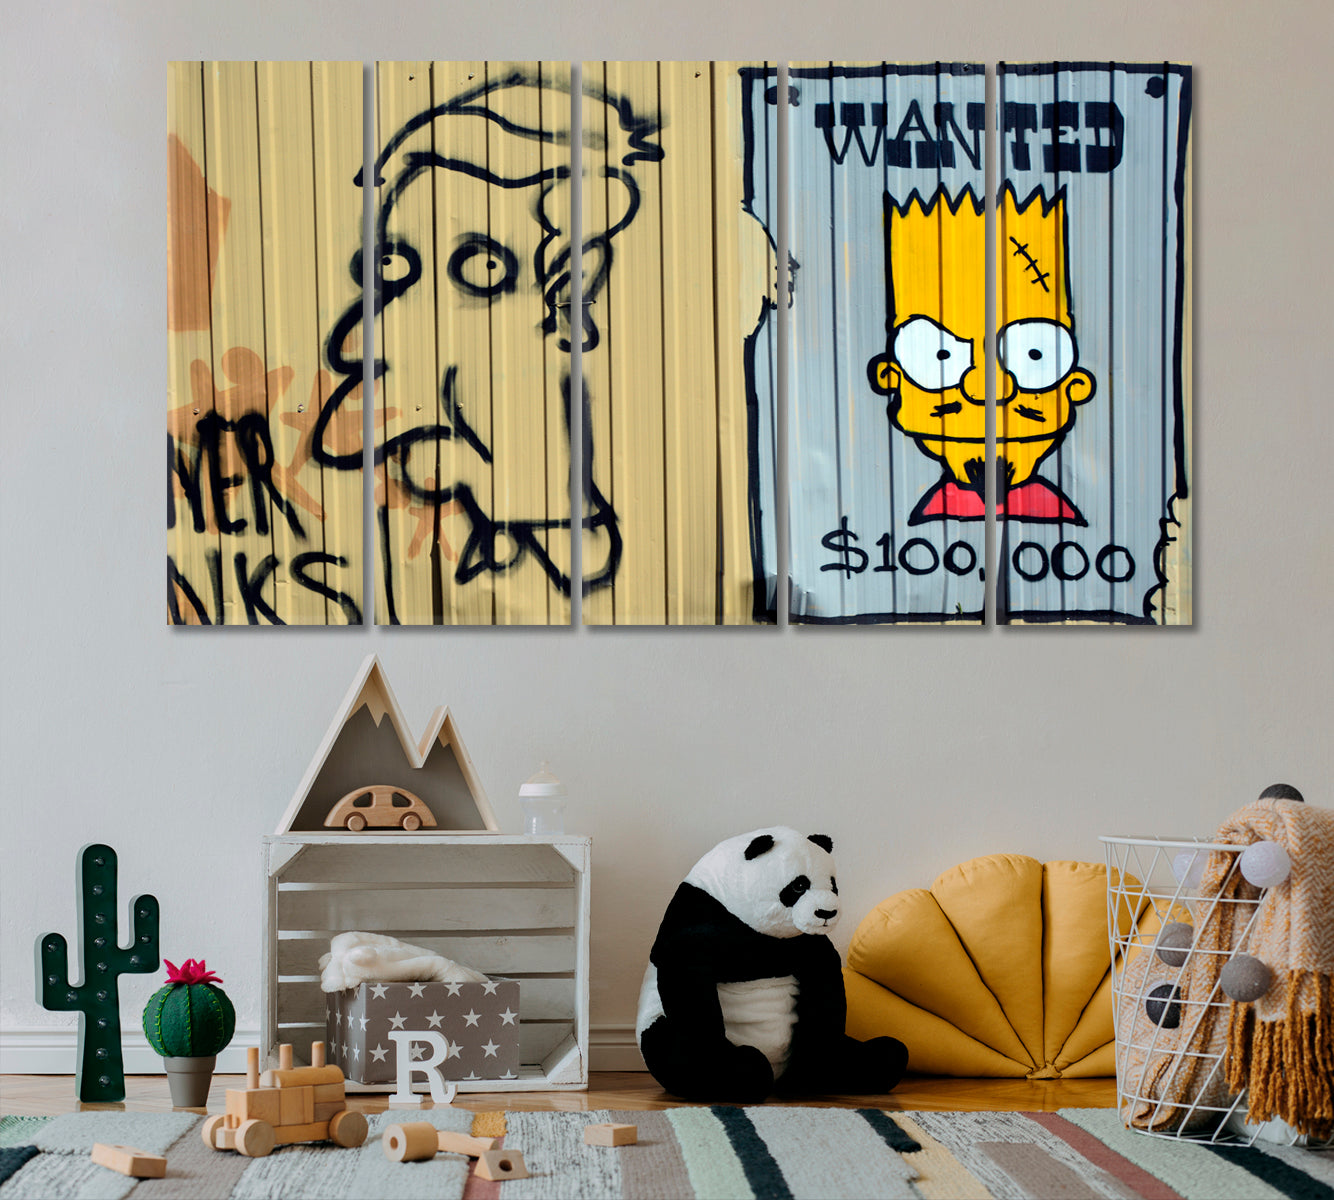 LOOKING FOR A STREET ART Urban Graffiti Bart Simpson Wanted! Montreal Canada Whimsical Canvas Print Street Art Canvas Print Artesty 5 panels 36" x 24" 